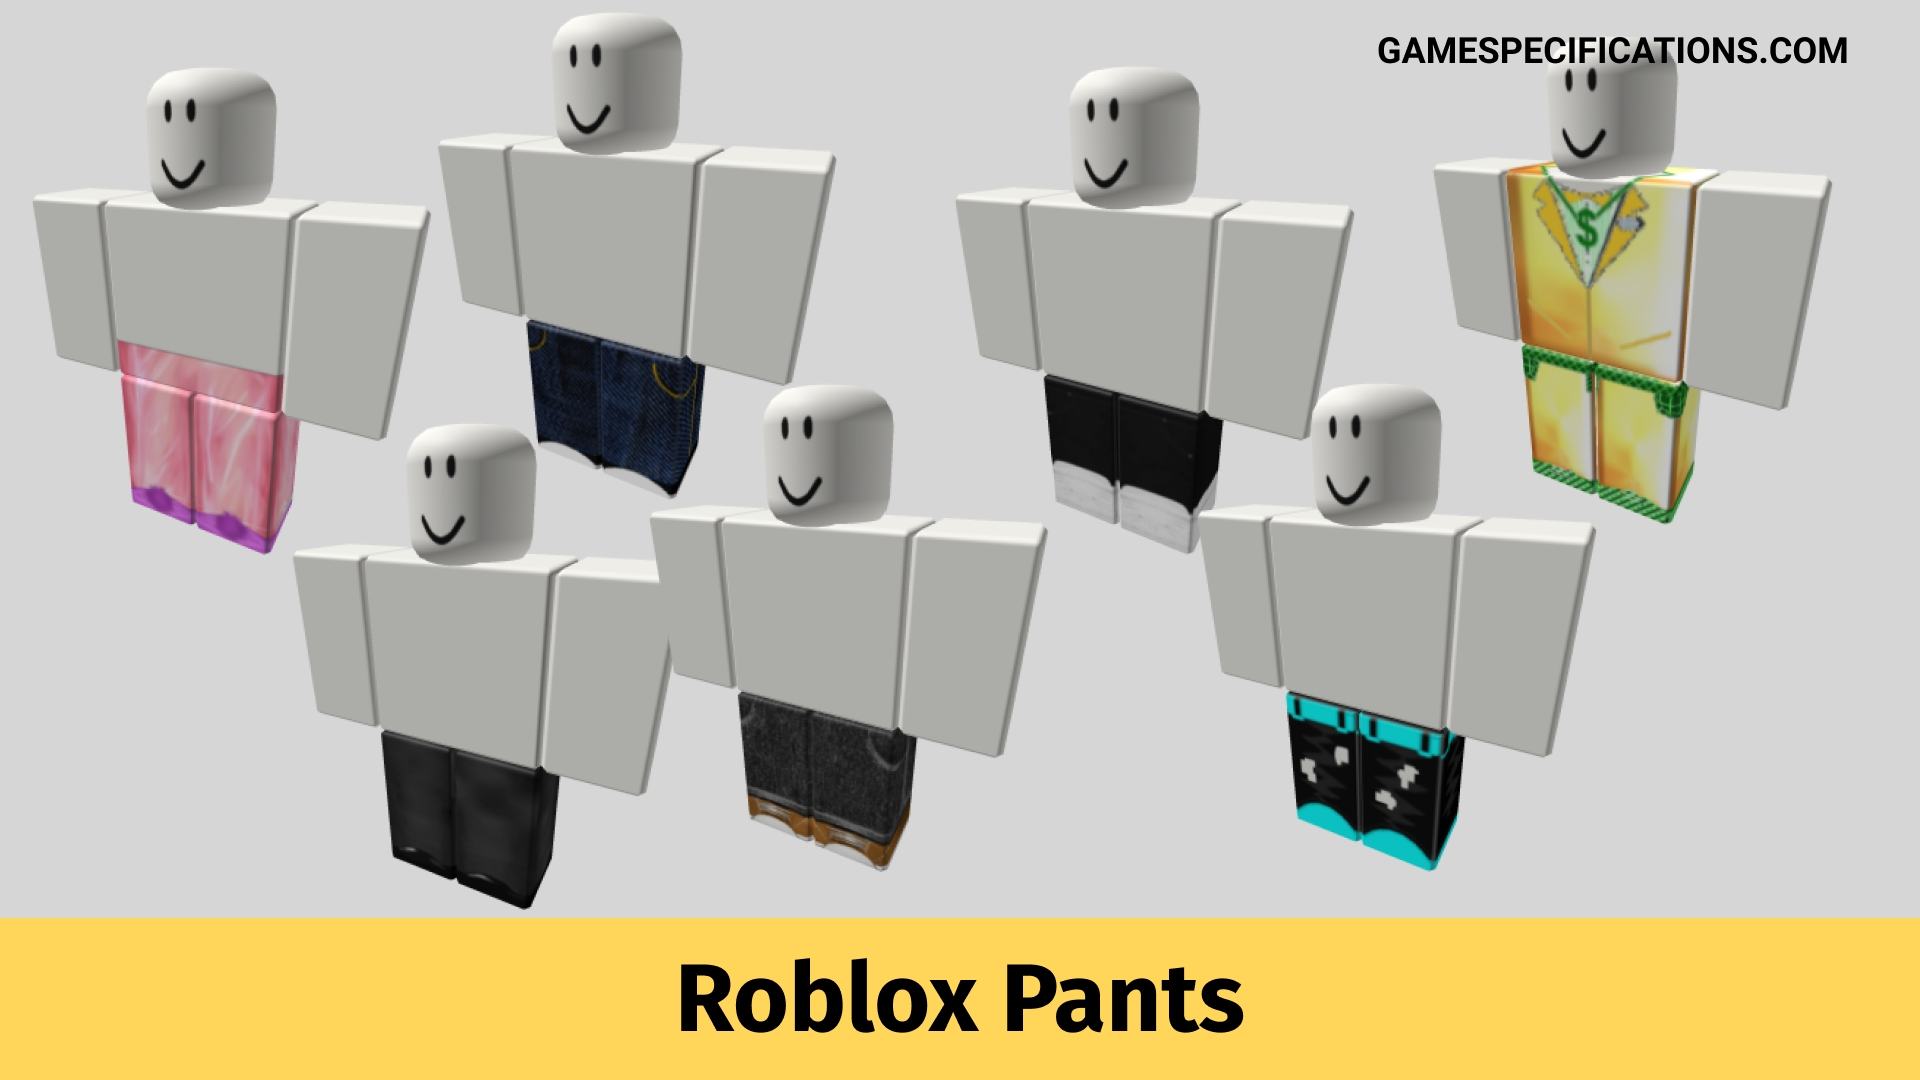 farmaceut Præfiks Scully Top 23 Roblox Pants Of All Time | Free, Aesthetic, and Best Selling - Game  Specifications